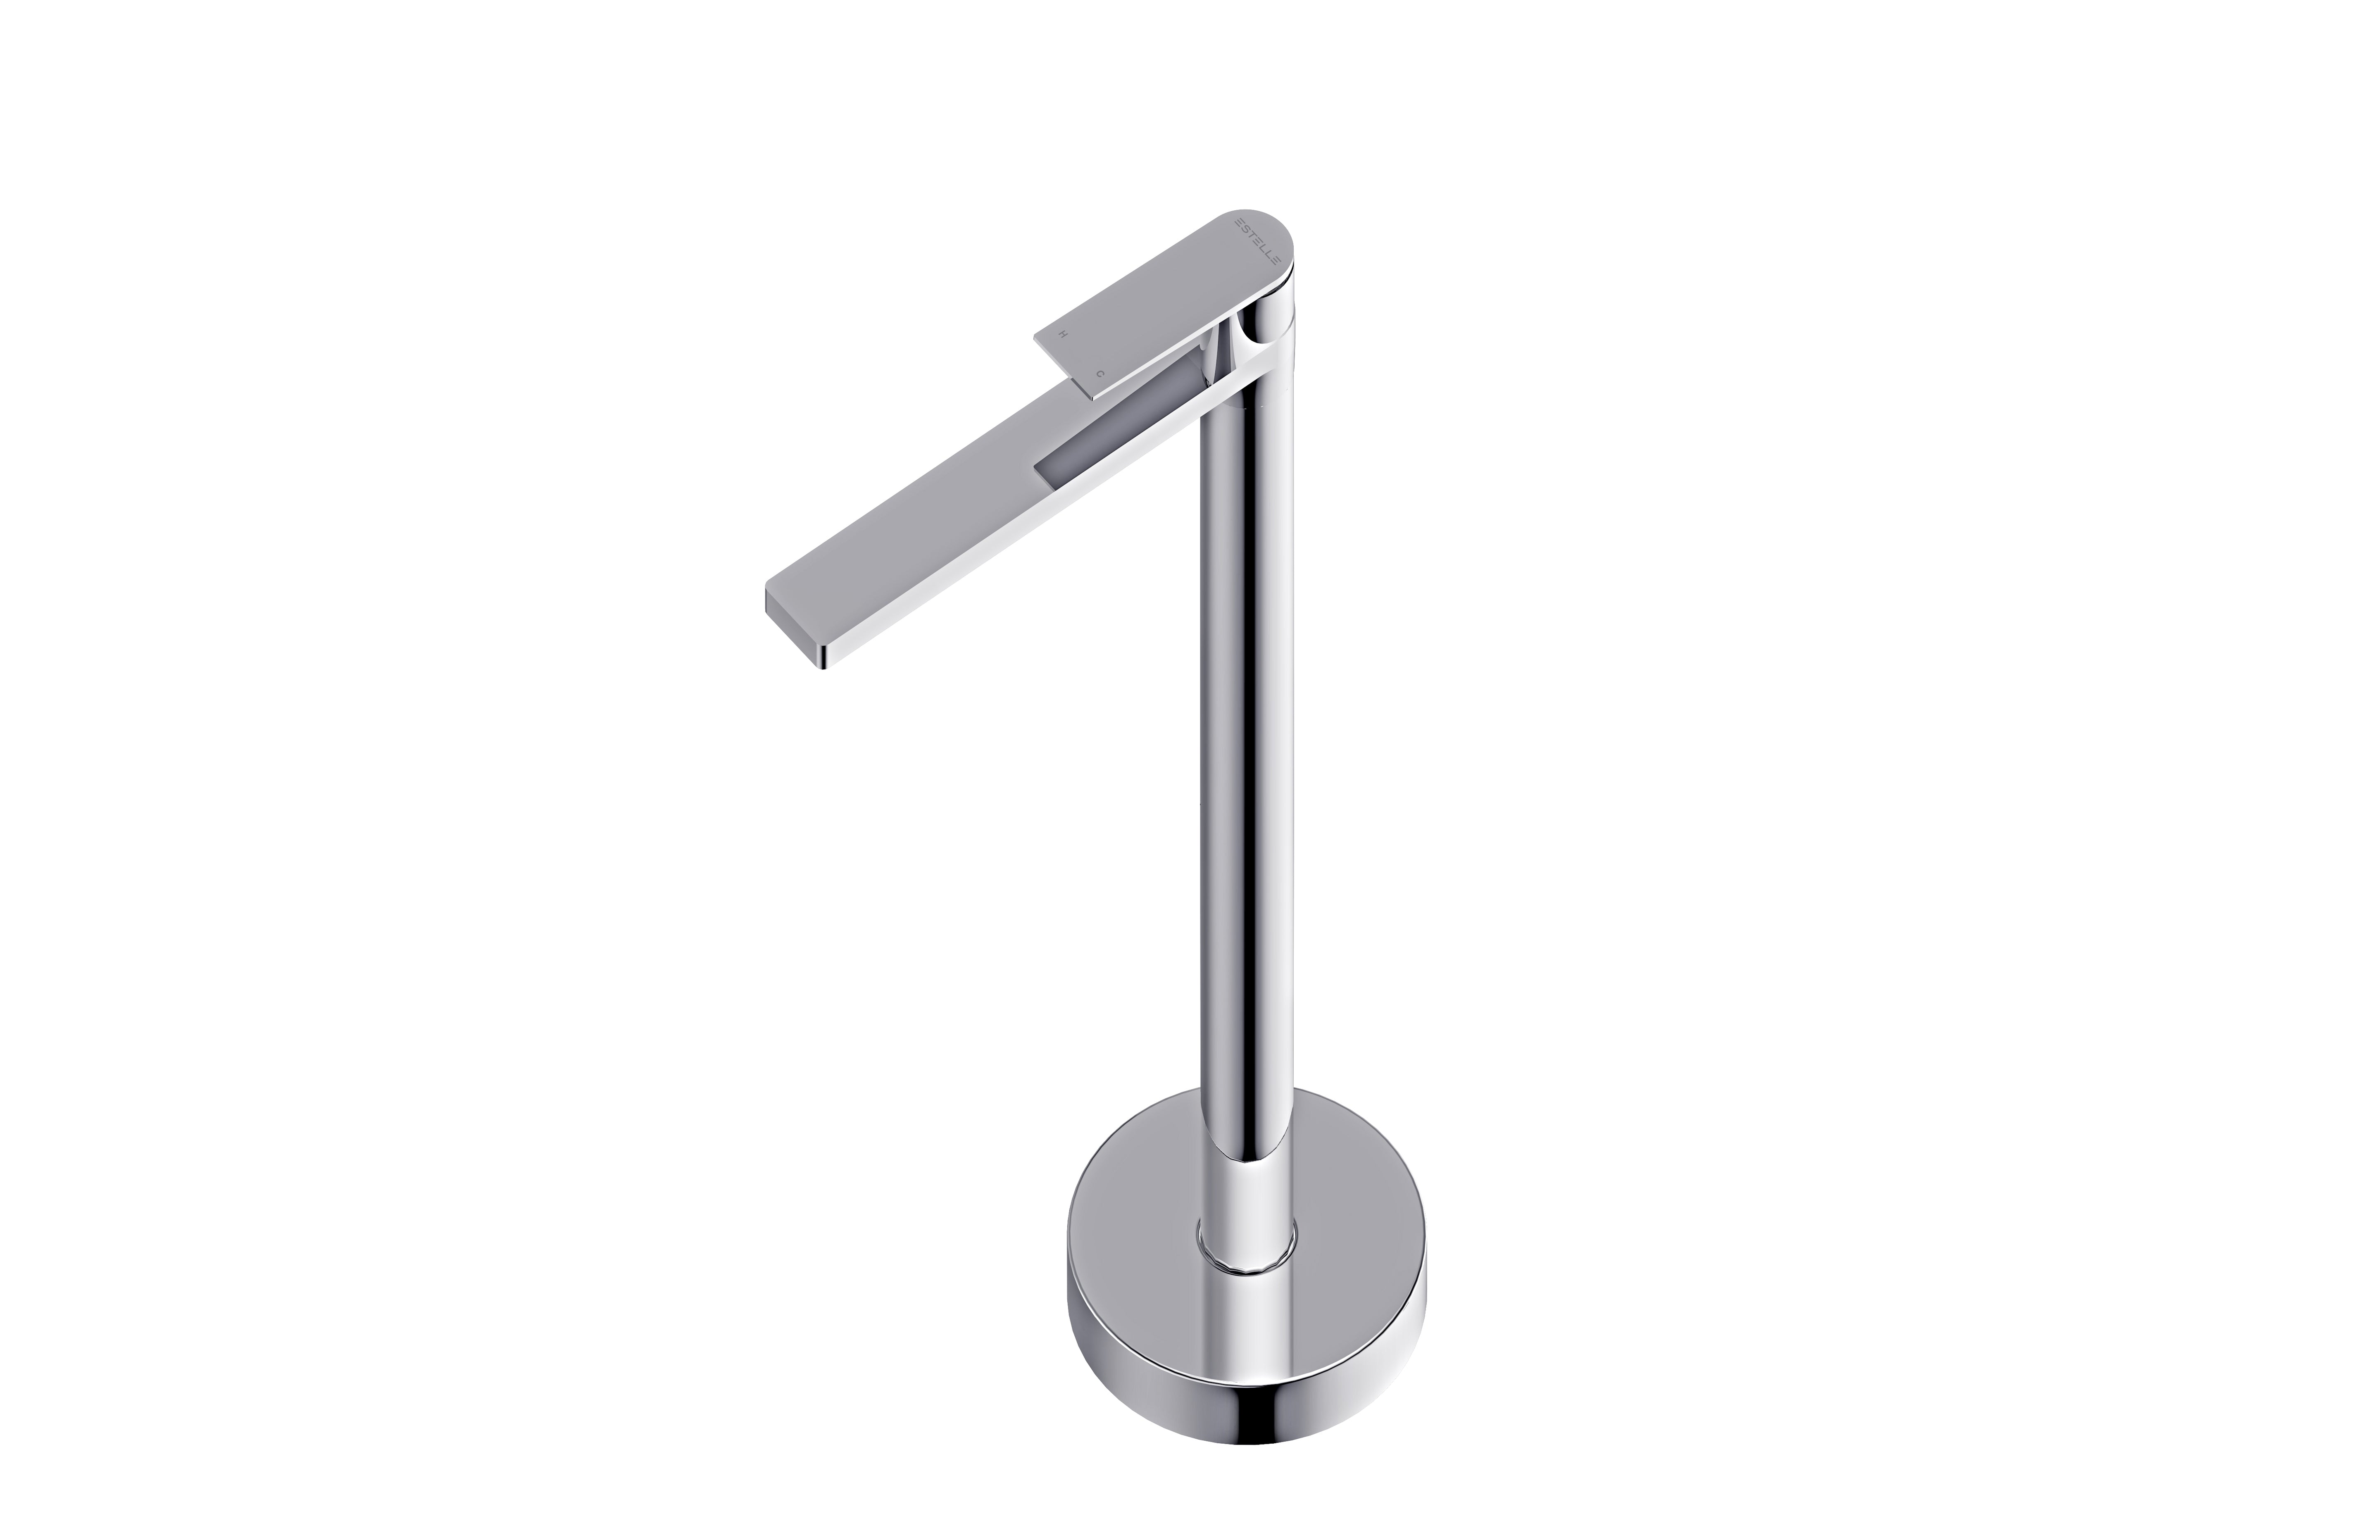 Stateman Floor Standing Bath spout and Mixer Polished Chrome